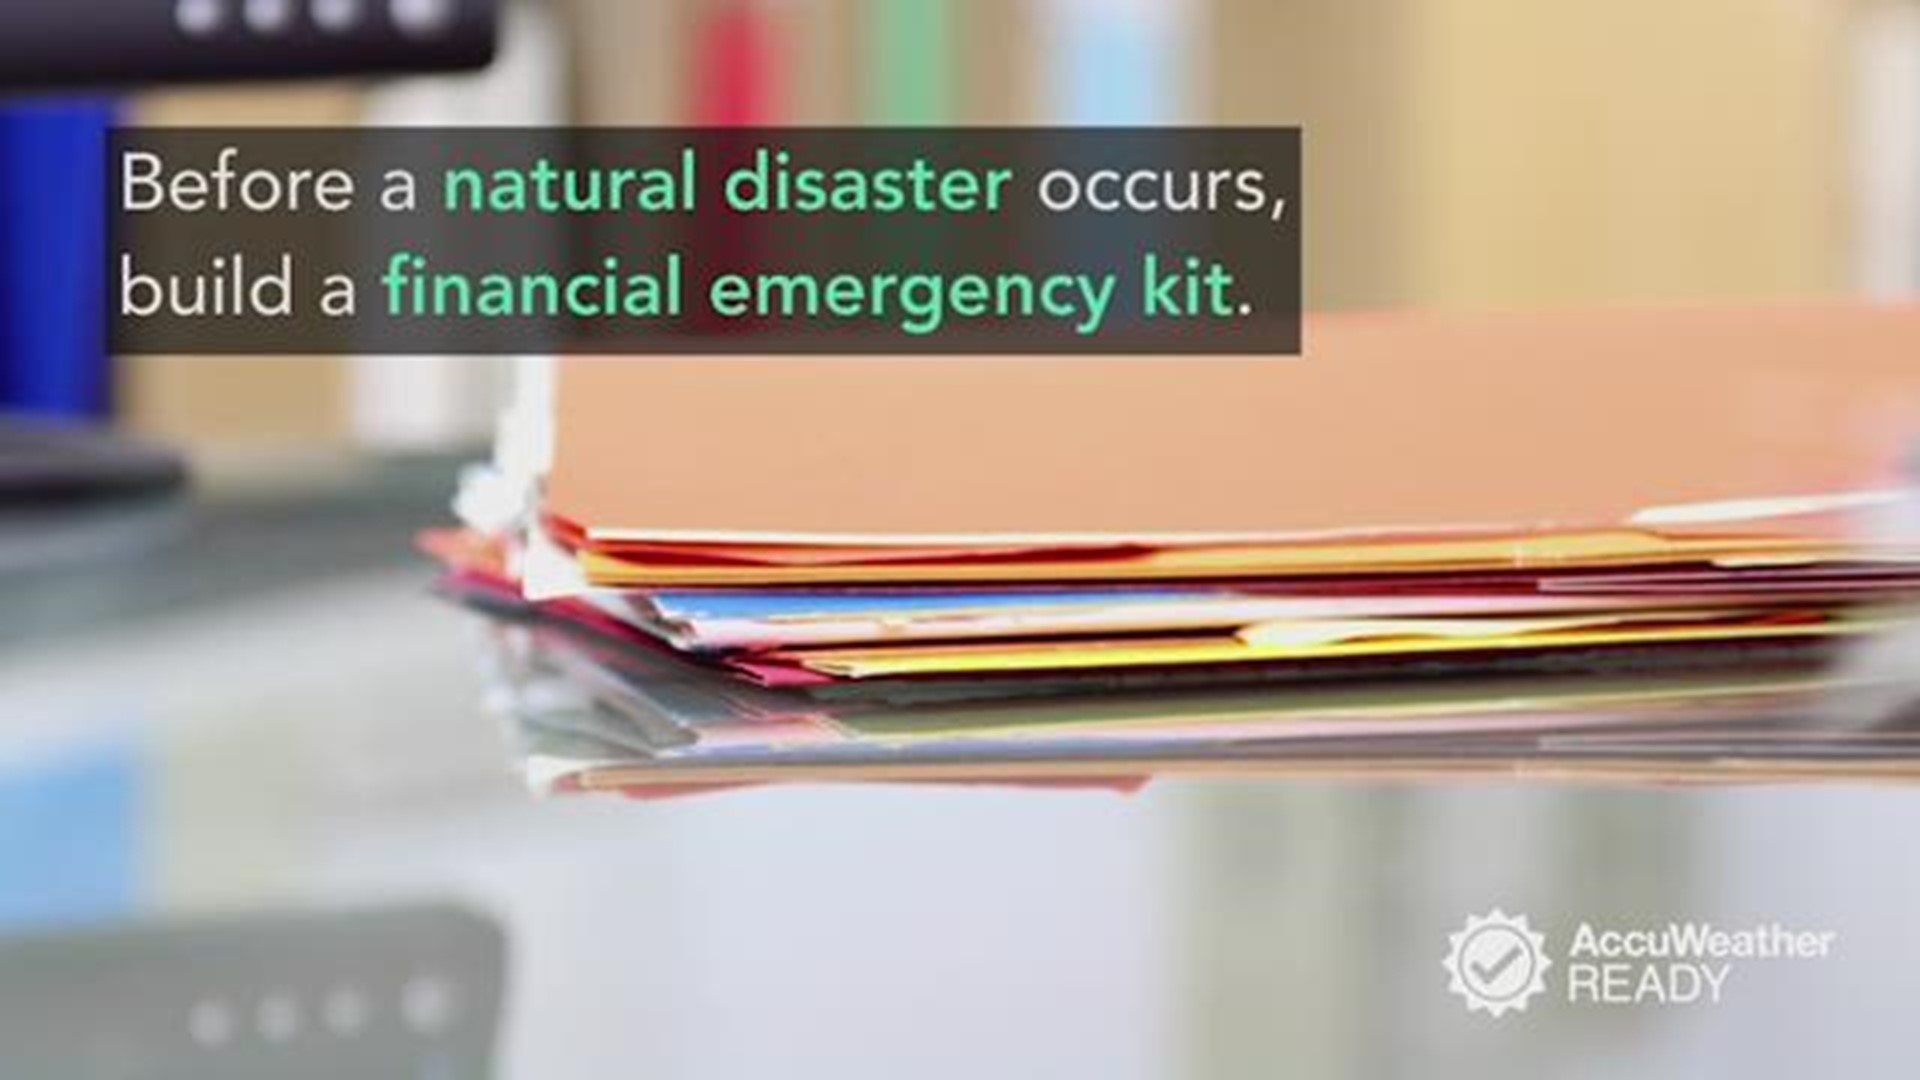 Over 40 percent of Americans don't have $400 in savings, according to the Federal Reserve. If a natural disaster strikes your area, it's crucial to have your finances in order before it occurs. 